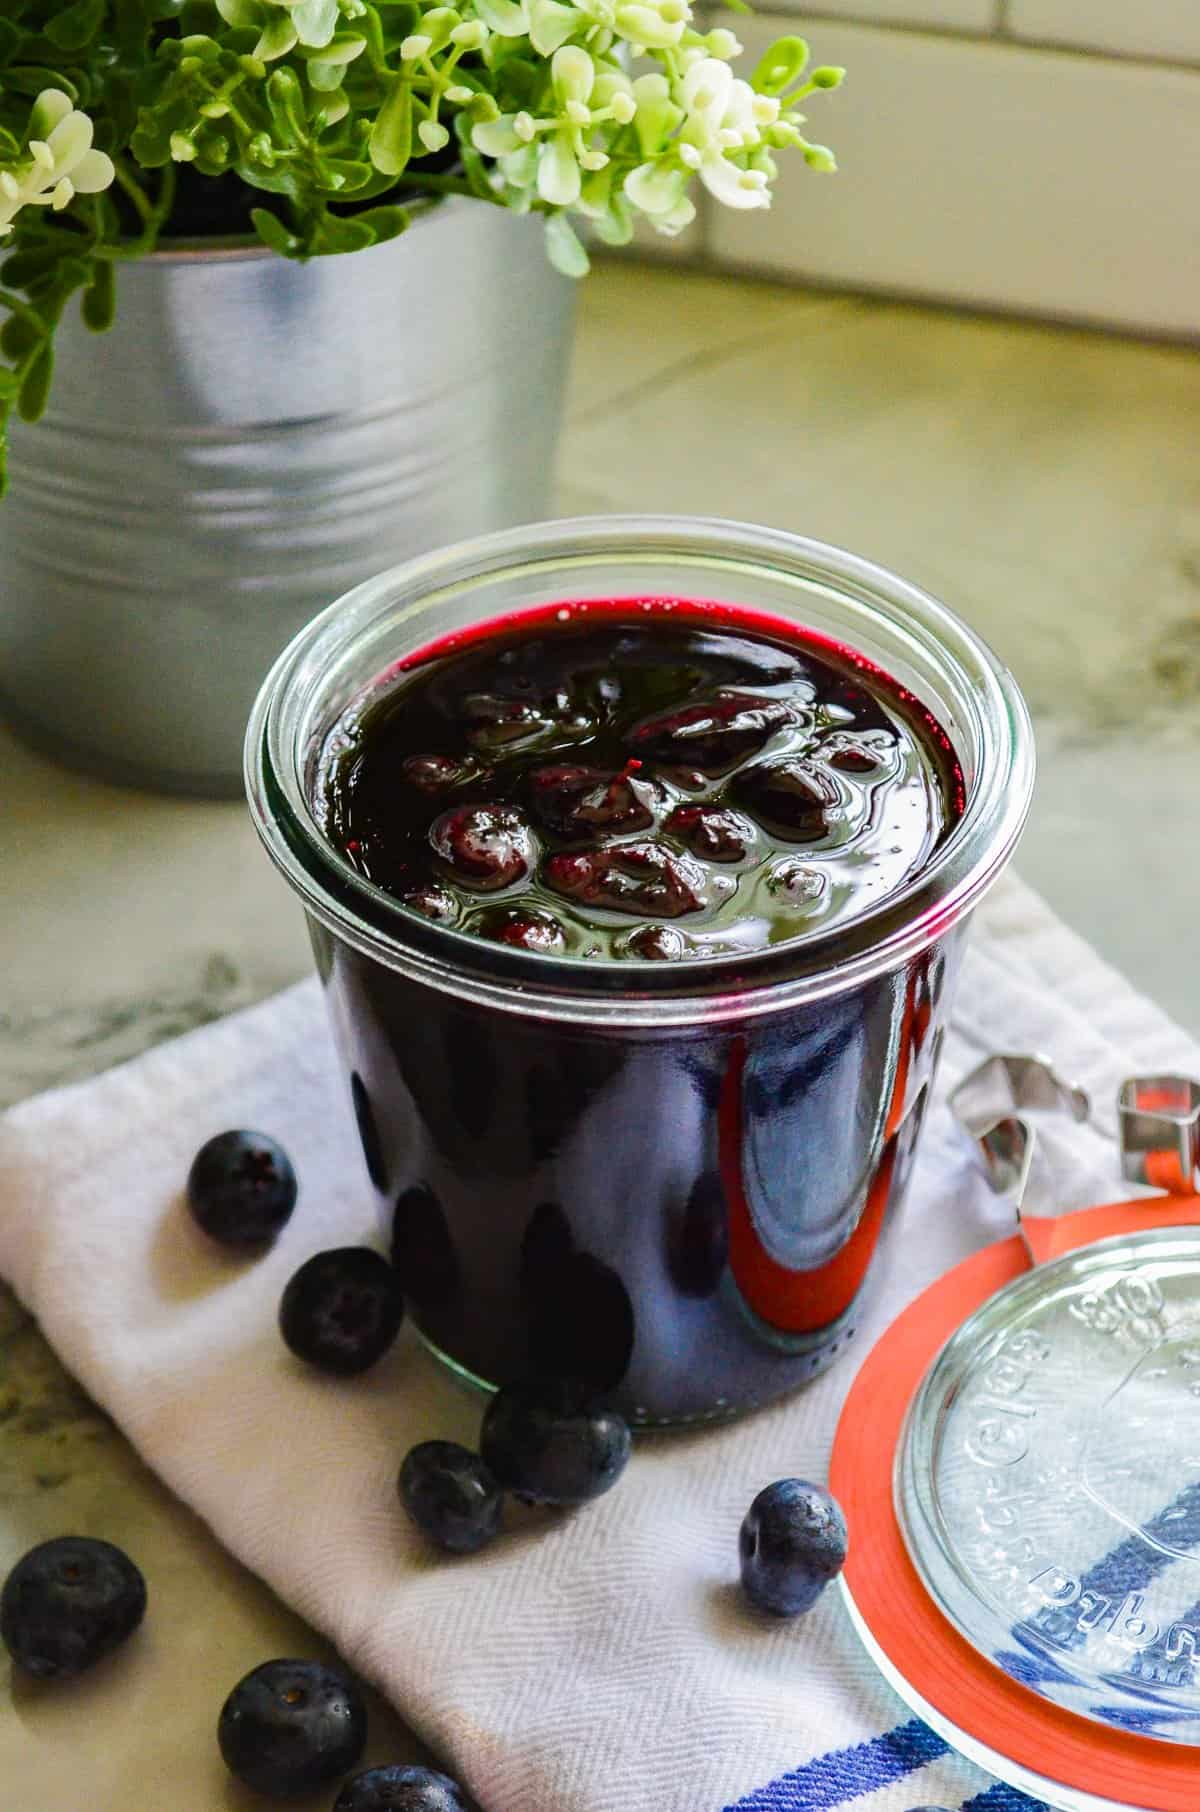 clear cup filled Blueberry Compote on a white napkin with blueberries on it, with a red and clear lid, with a silver pot with a green plant on the top left side.